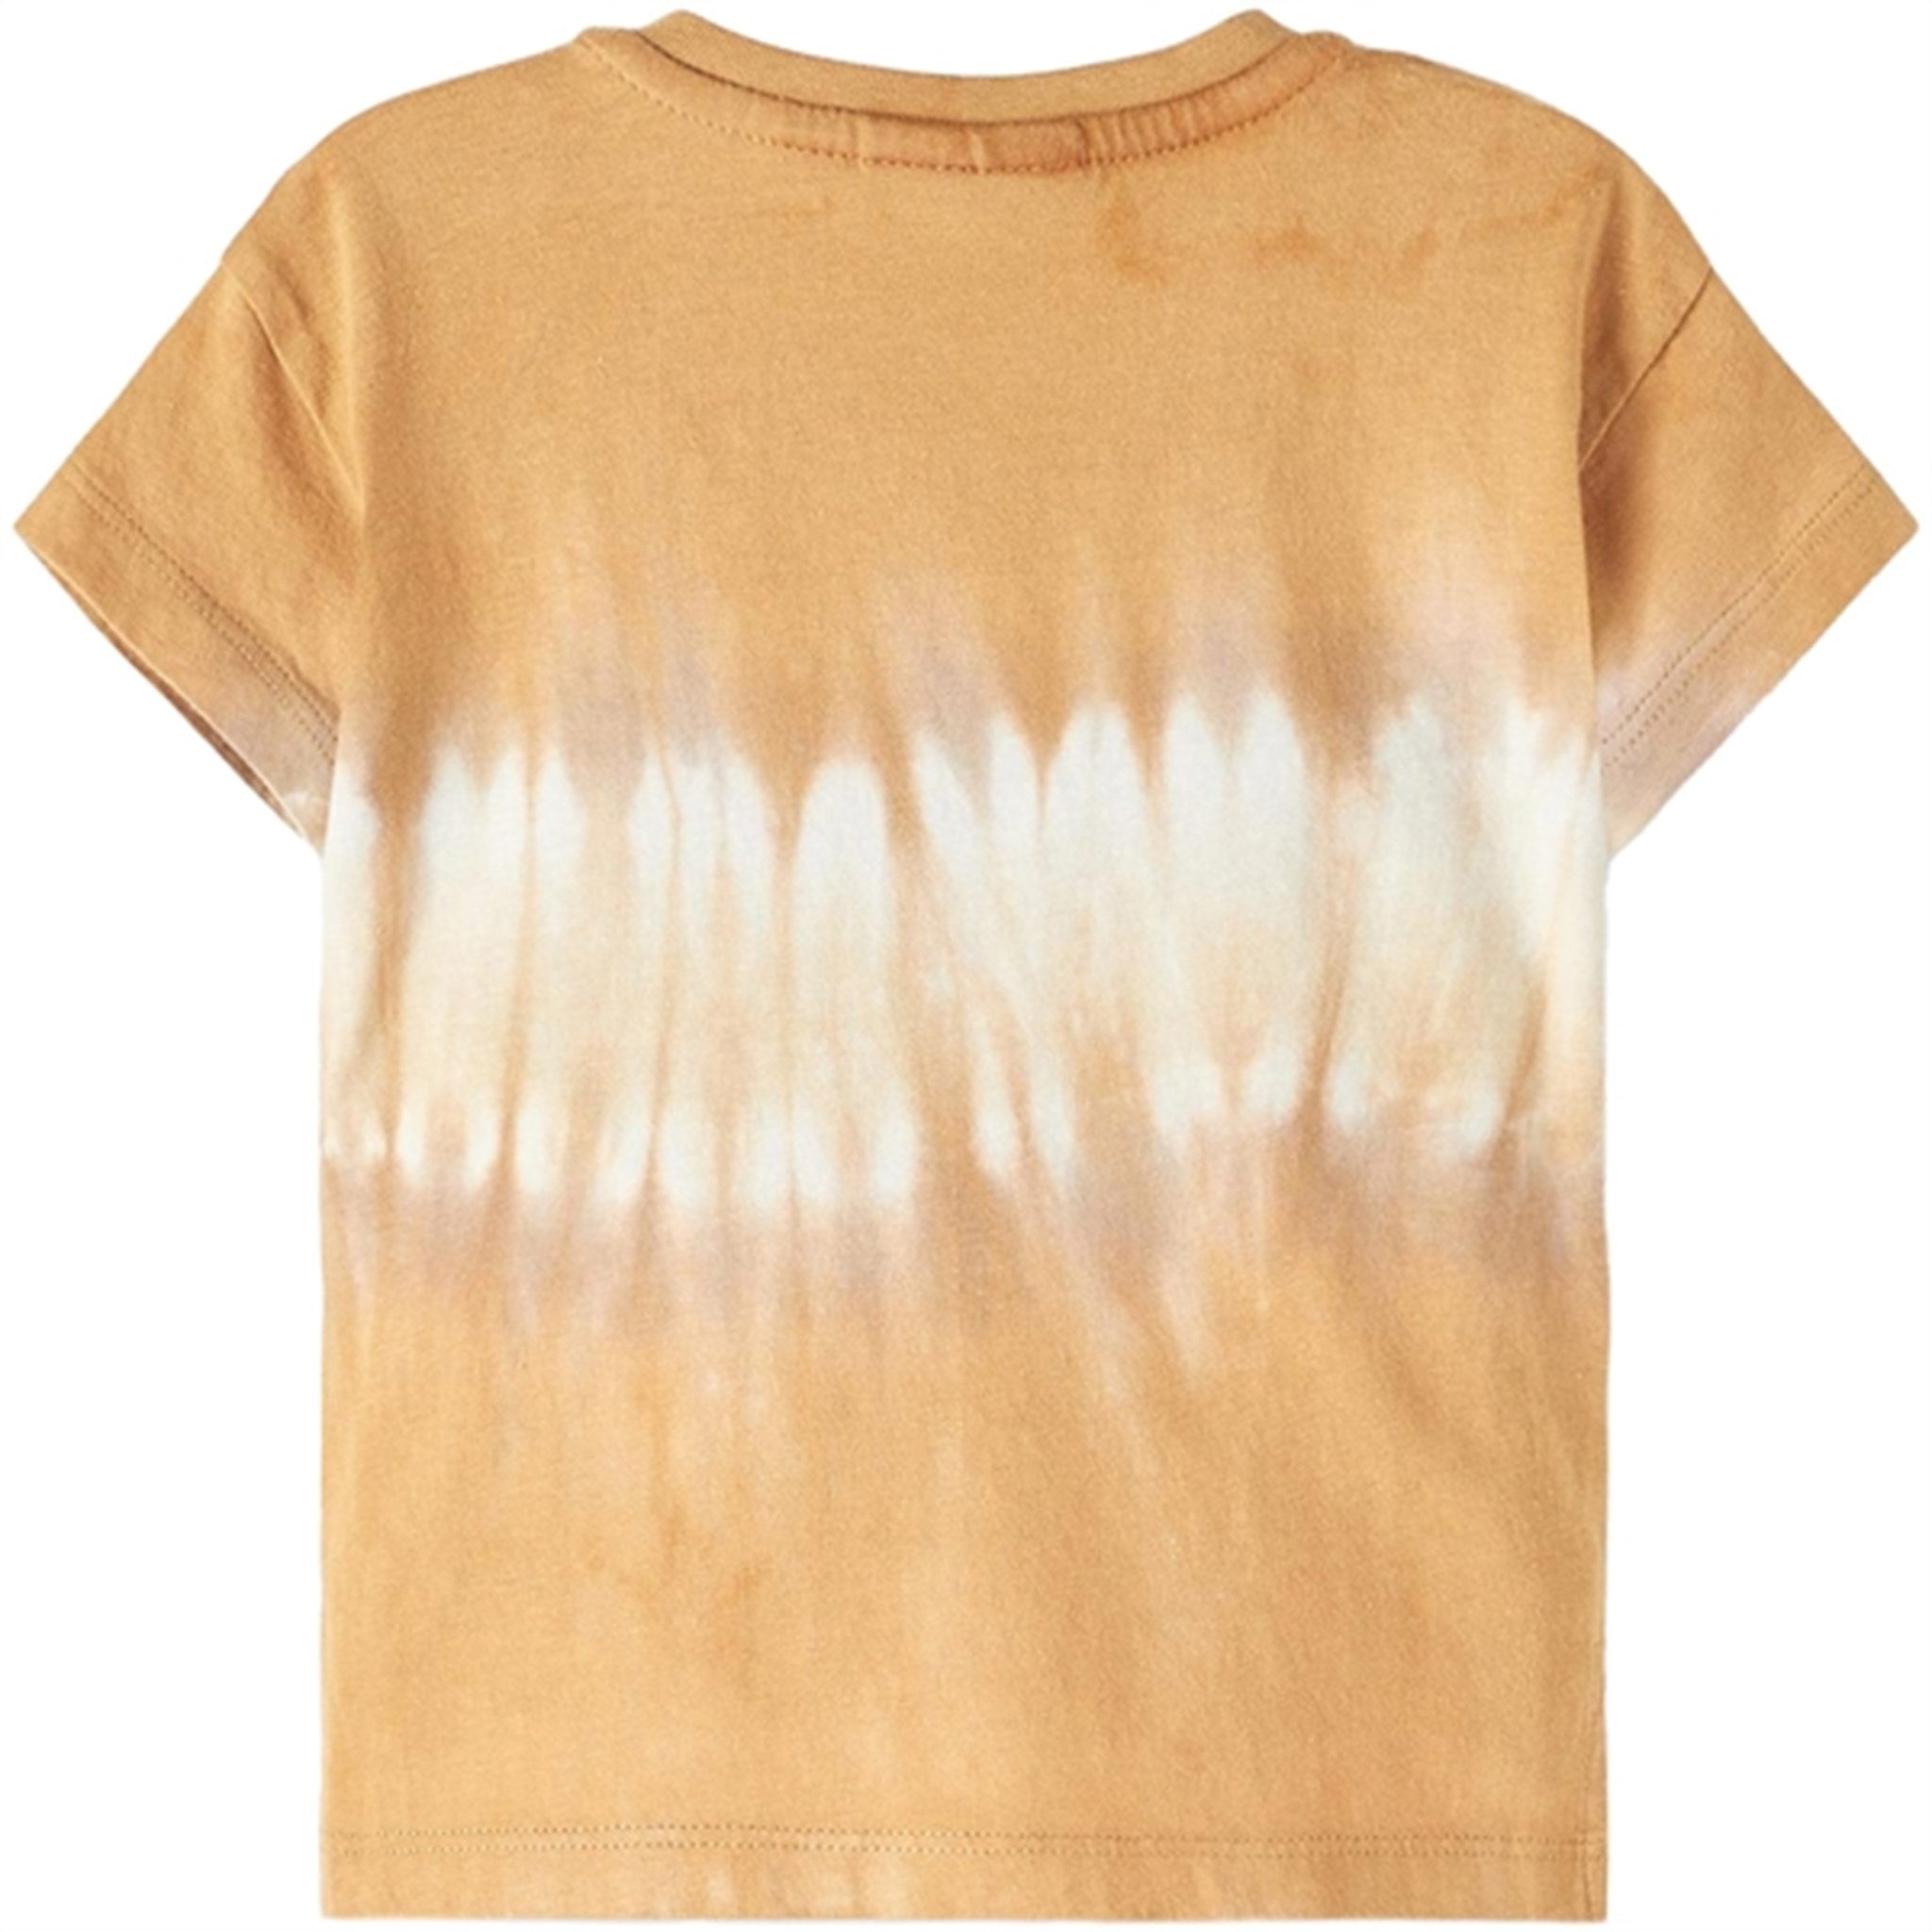 Lil' Atelier Iced Coffee Halfred T-shirt 3